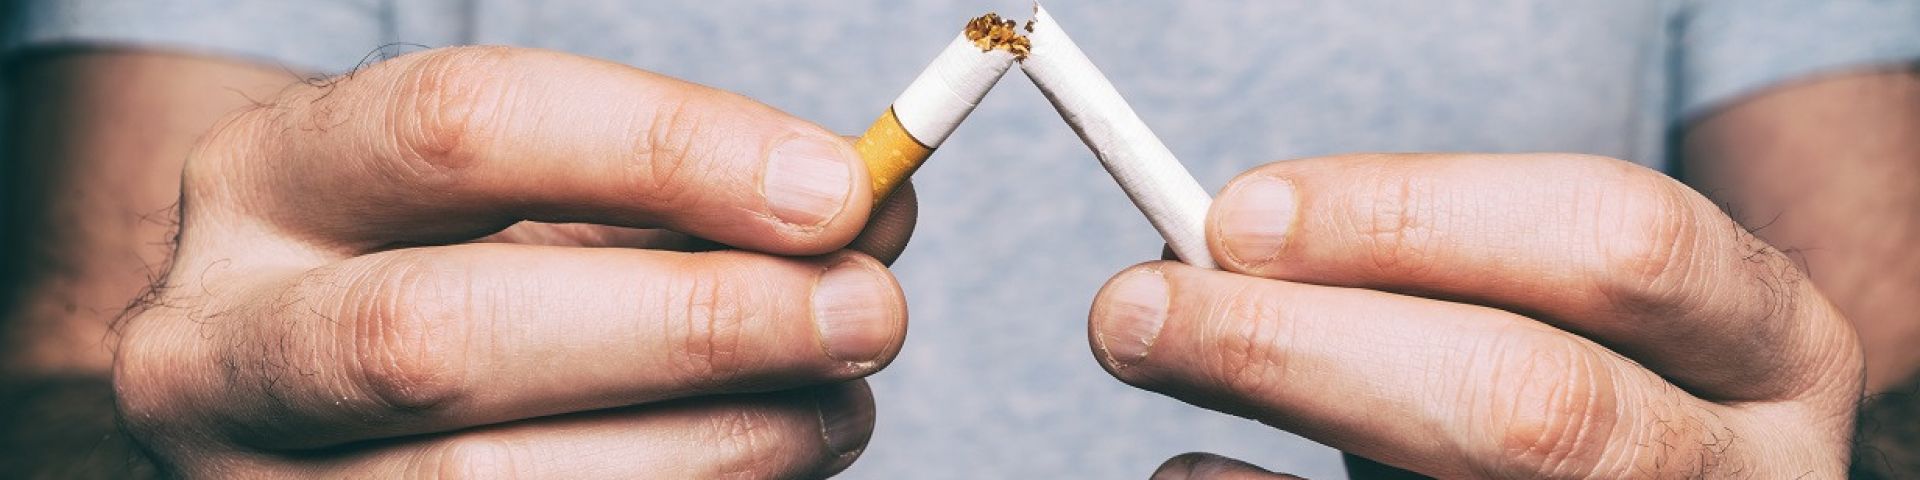 Want to quit smoking? Start with Day One